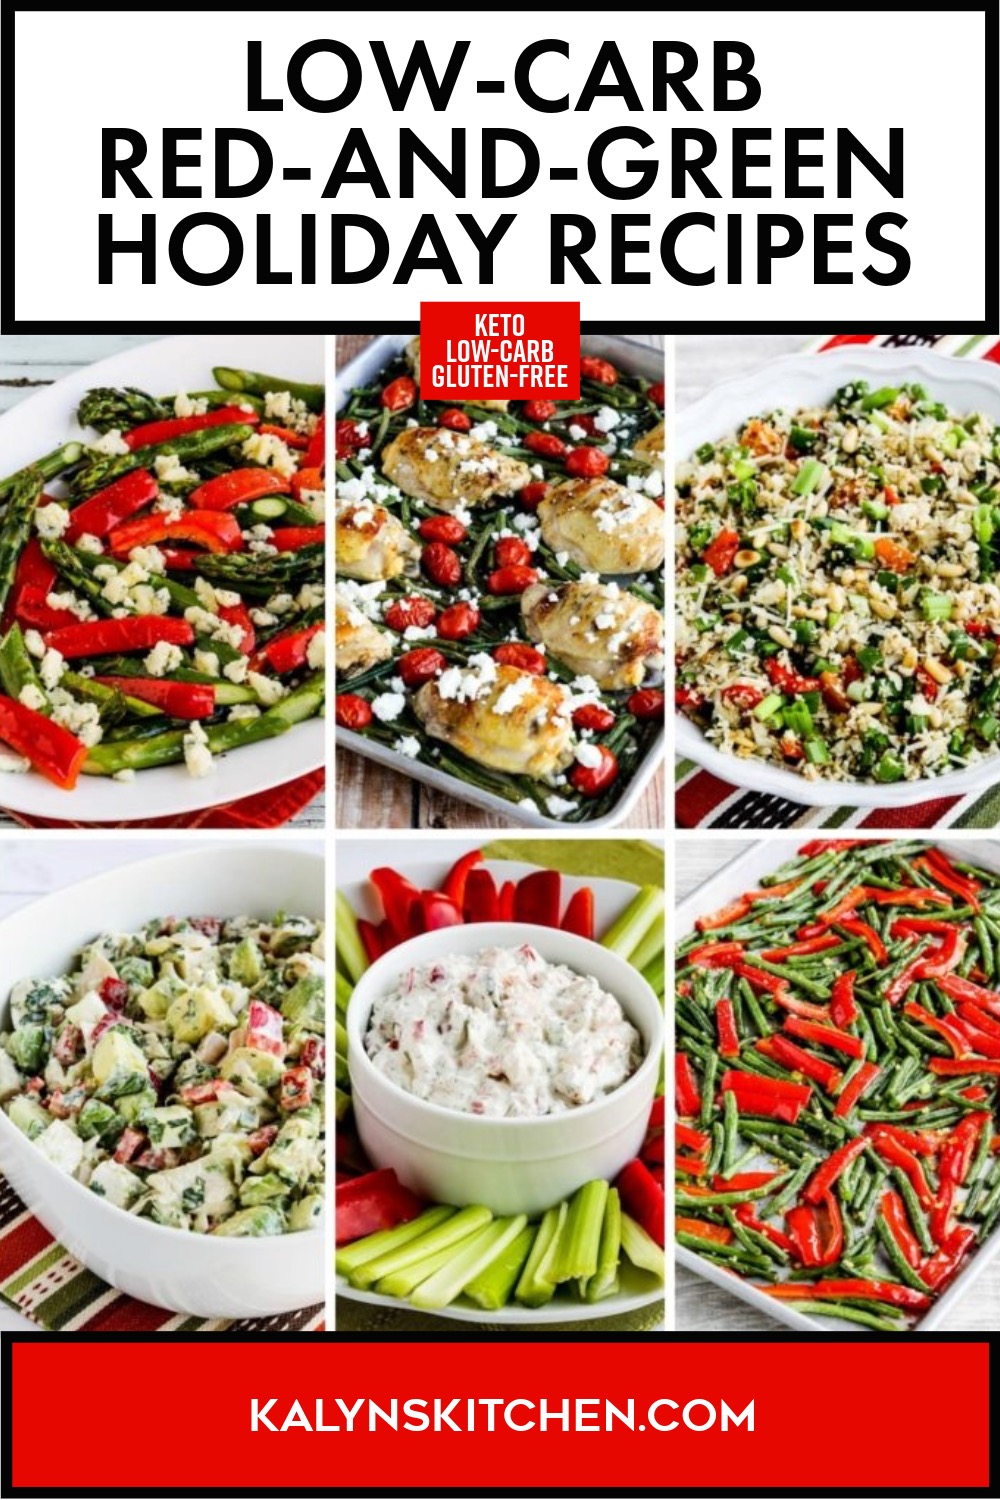 Pinterest image of Low-Carb Red-and-Green Holiday Recipes